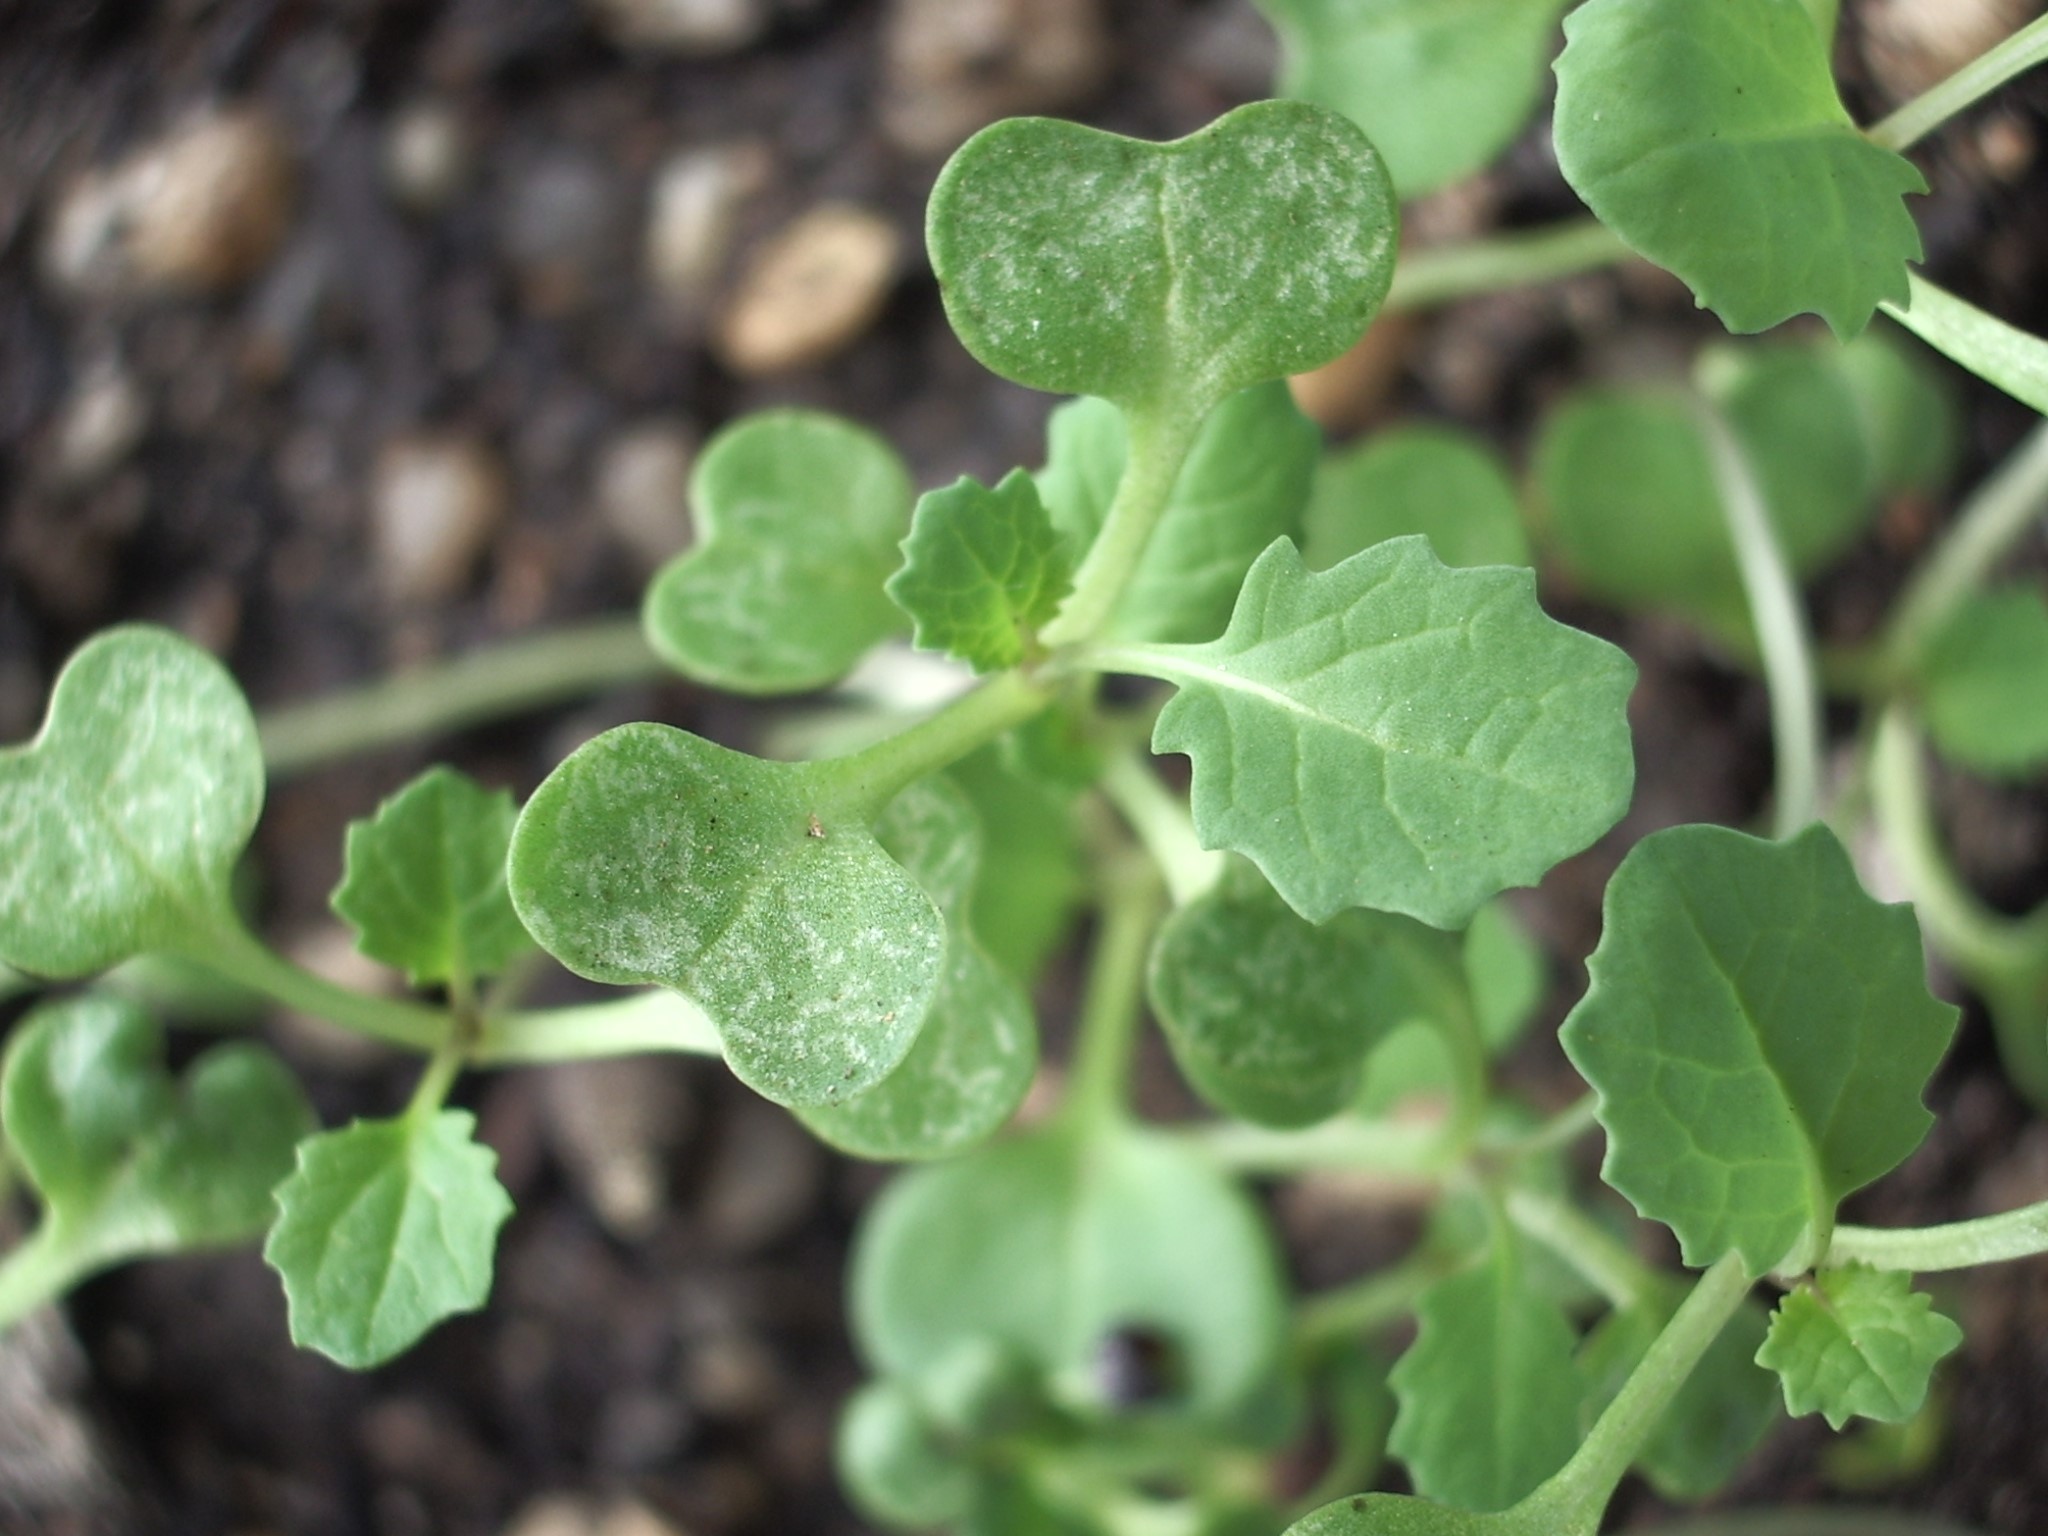 Photo of canola plant with showing whitish-grey spots caused by Bryobia mite feeding.